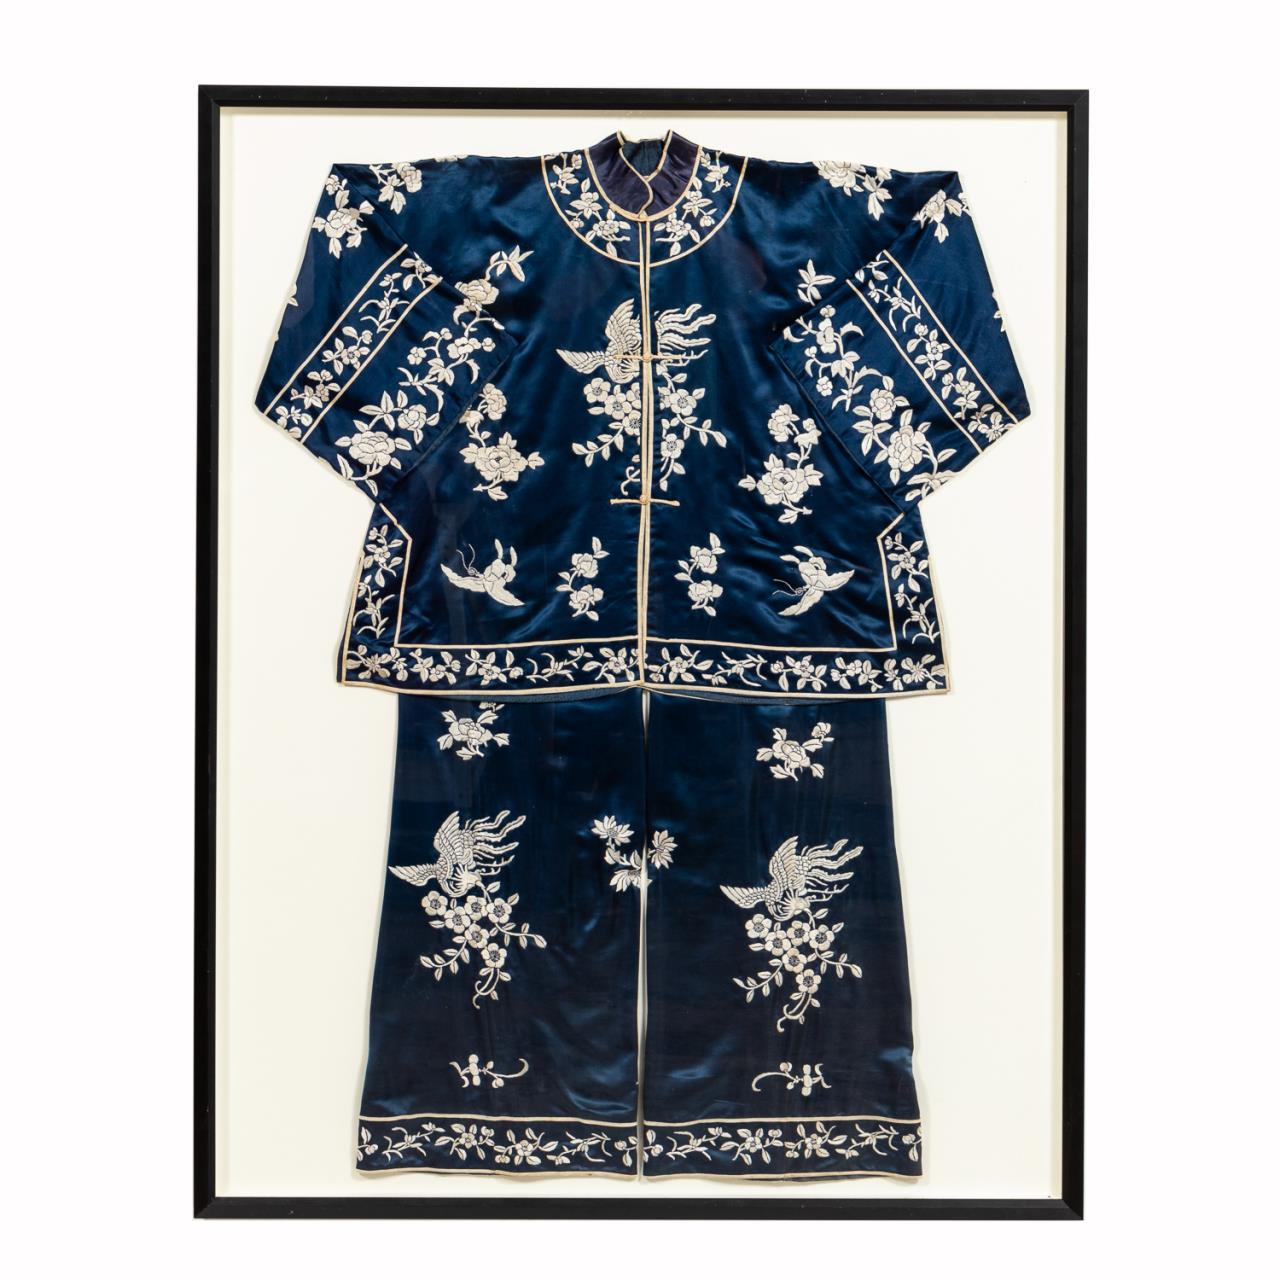 CHINESE, FRAMED BLUE EMBROIDERY